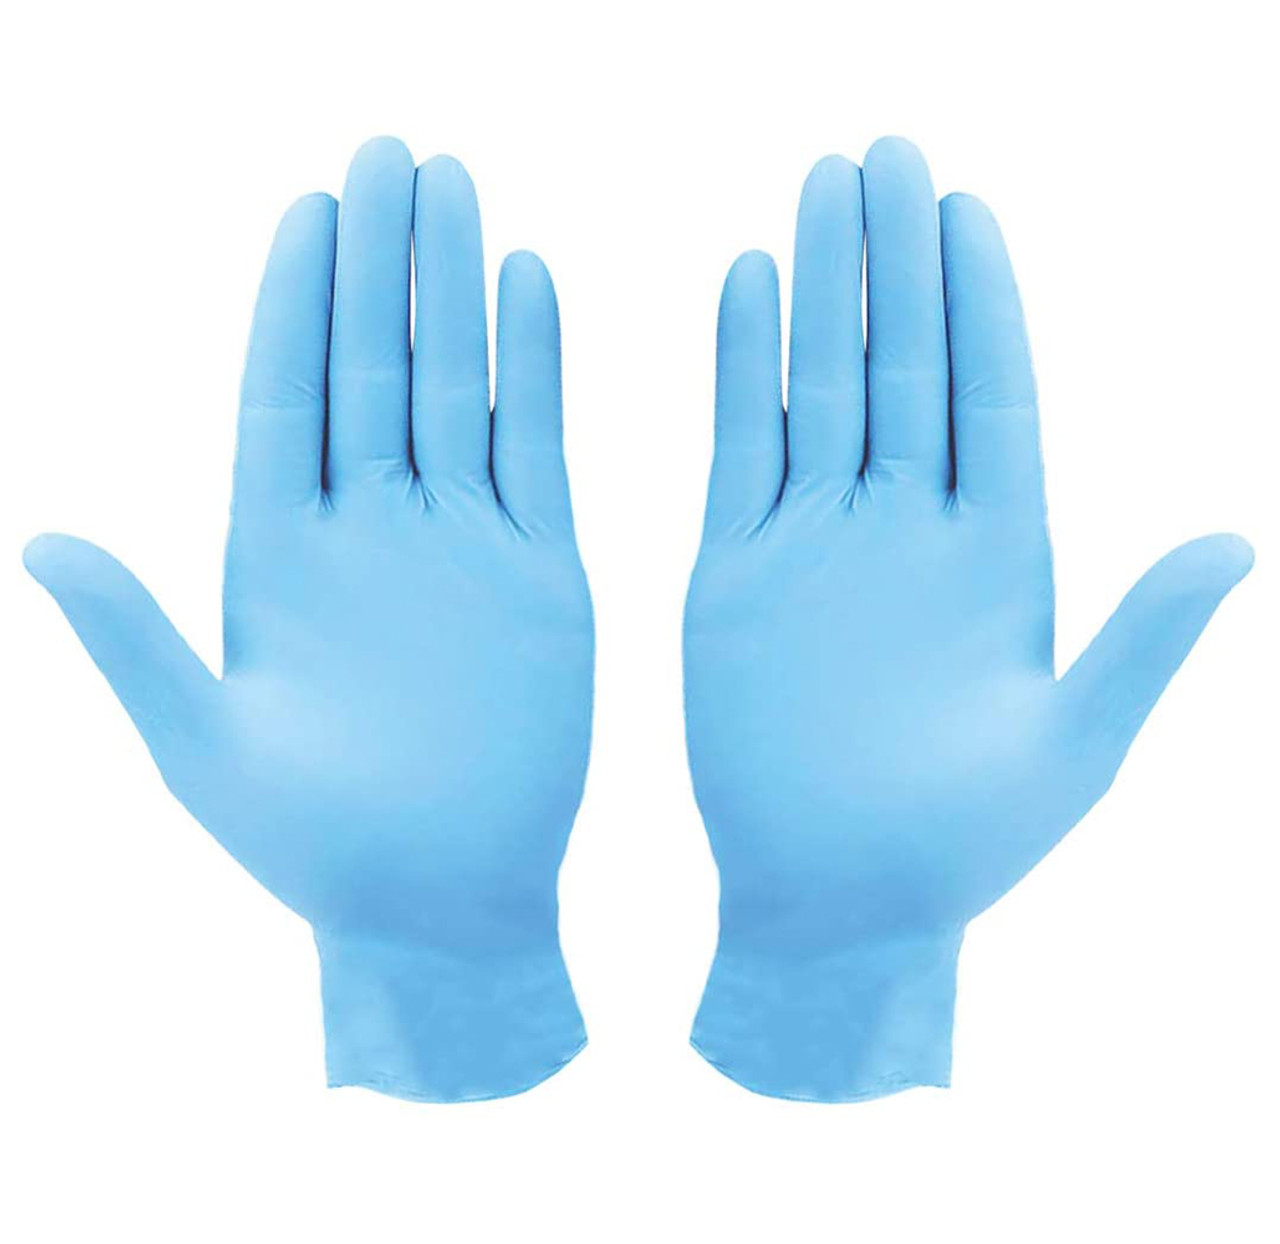 Powder Free Nitrile Rubber Disposable Examination Gloves (100-Pack) product image